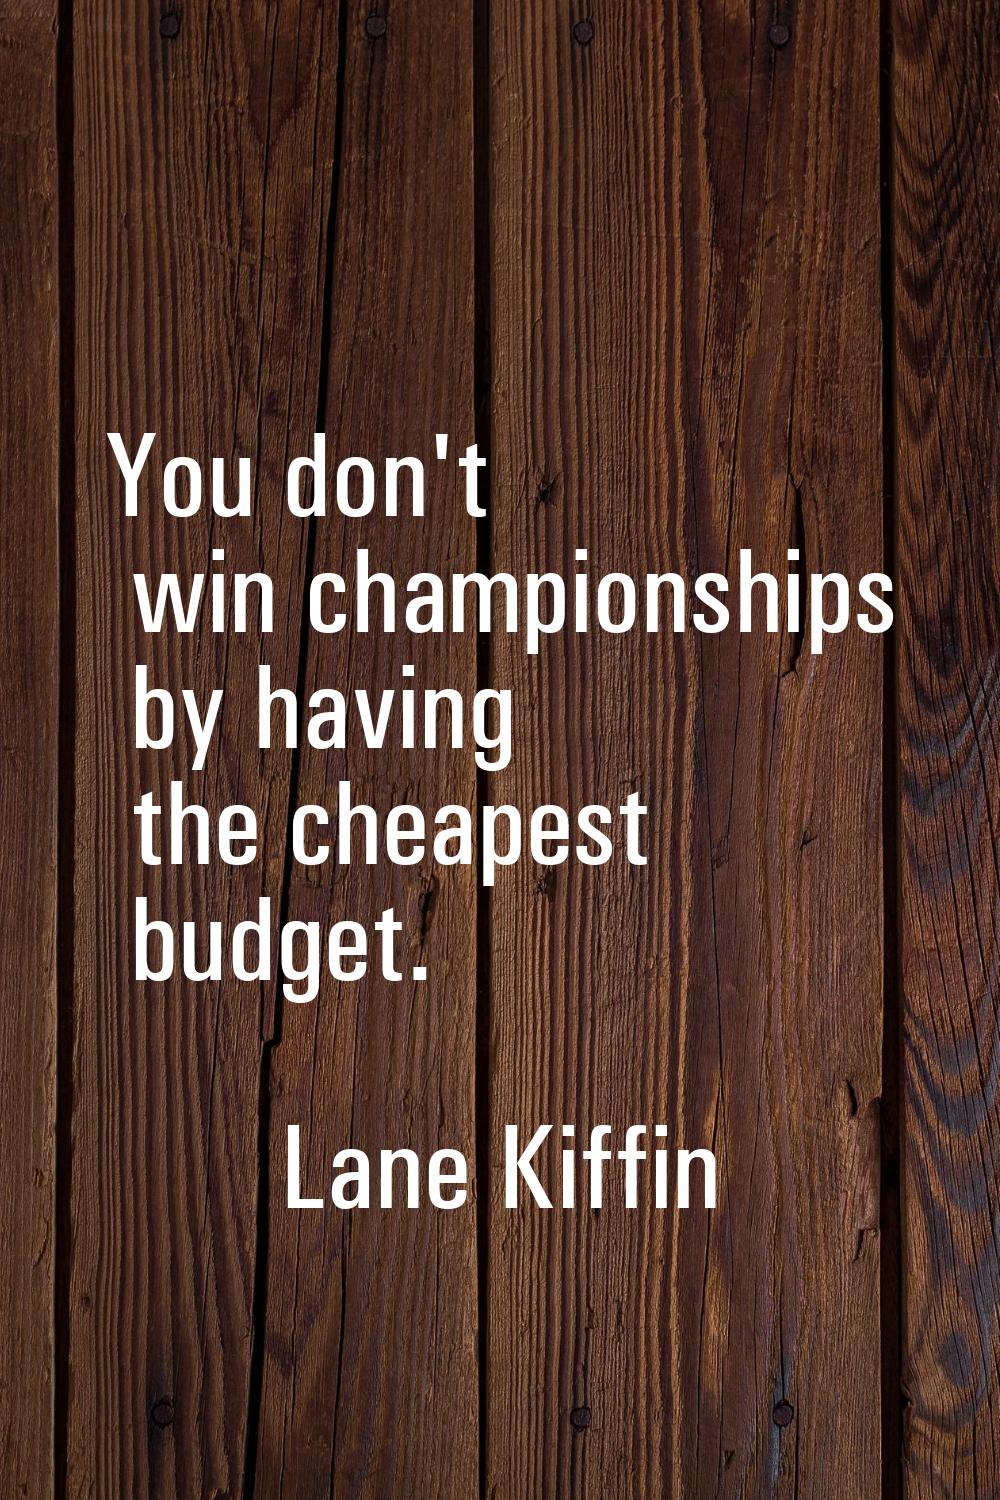 You don't win championships by having the cheapest budget.